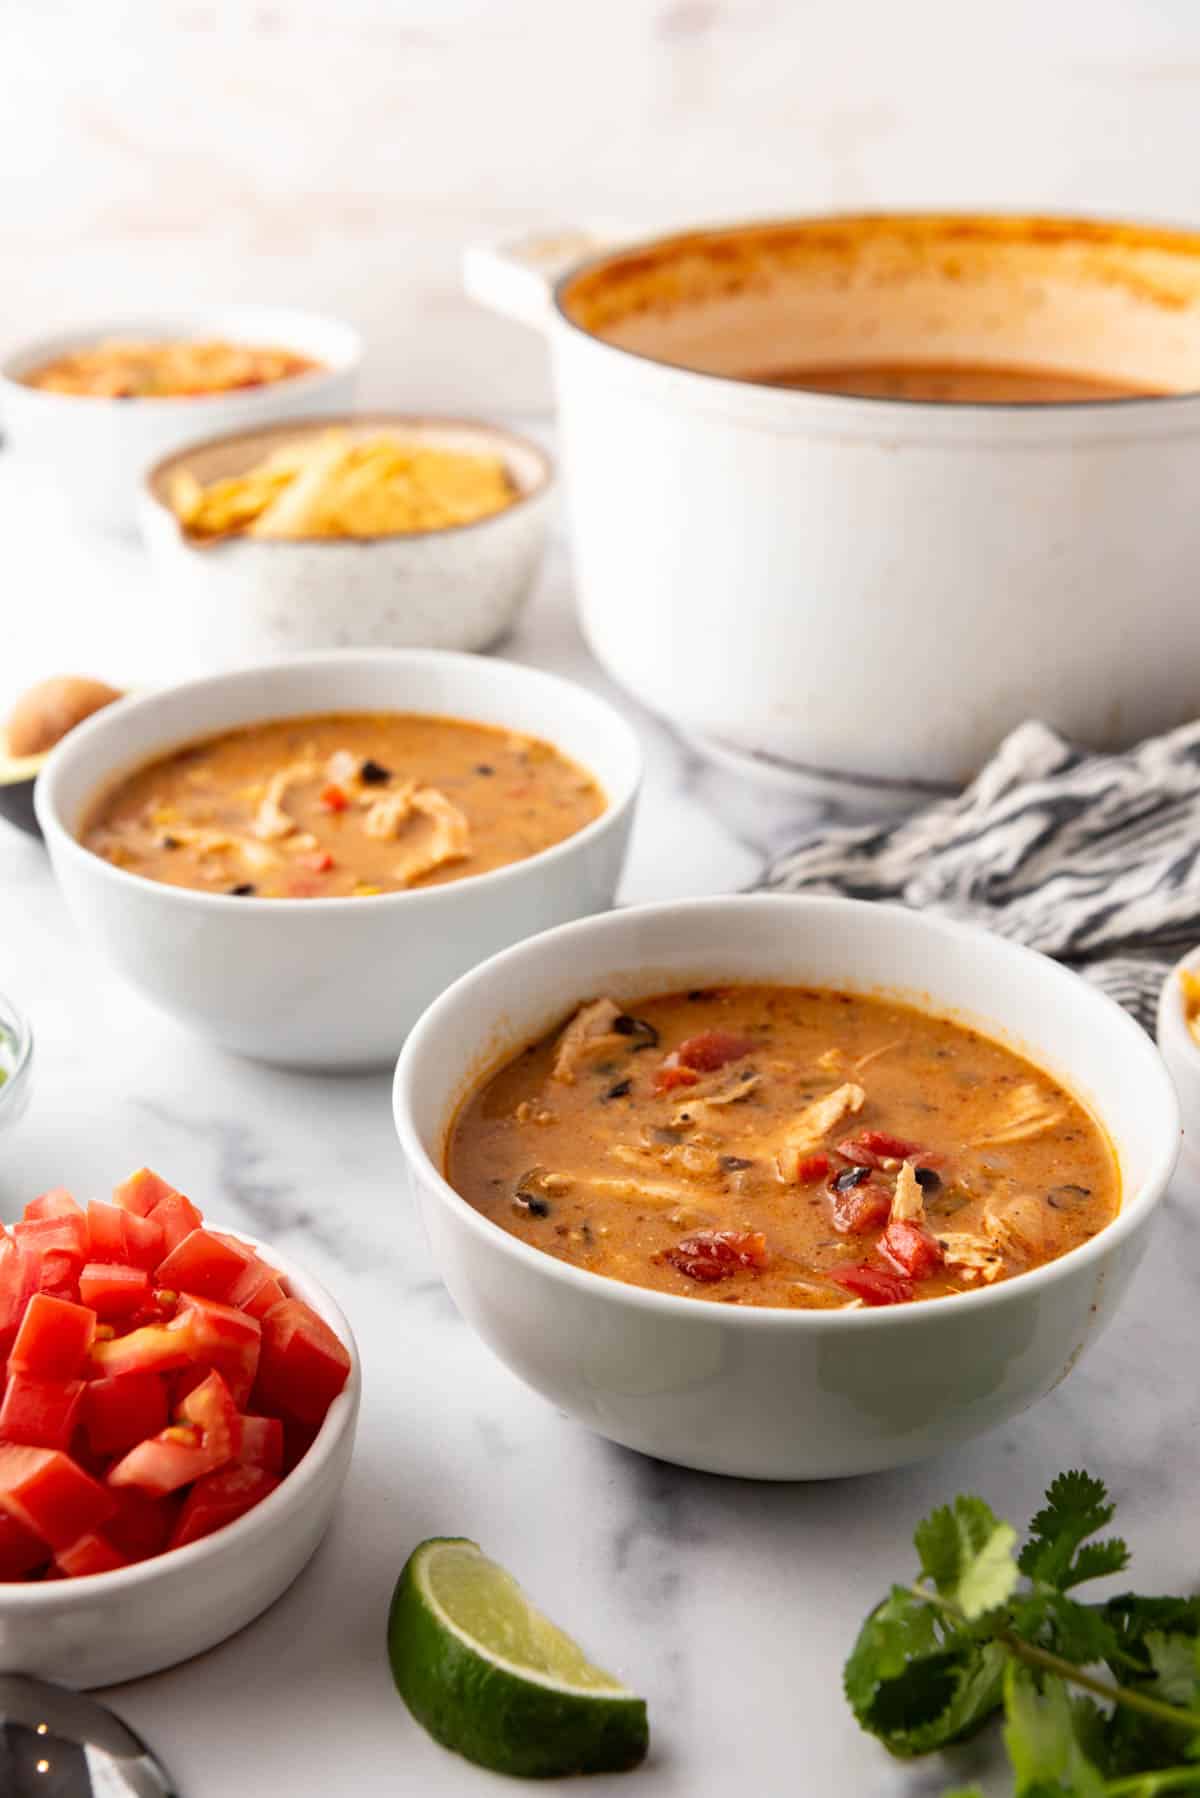 Bowls of chicken tortilla soup before adding toppings to each of them.